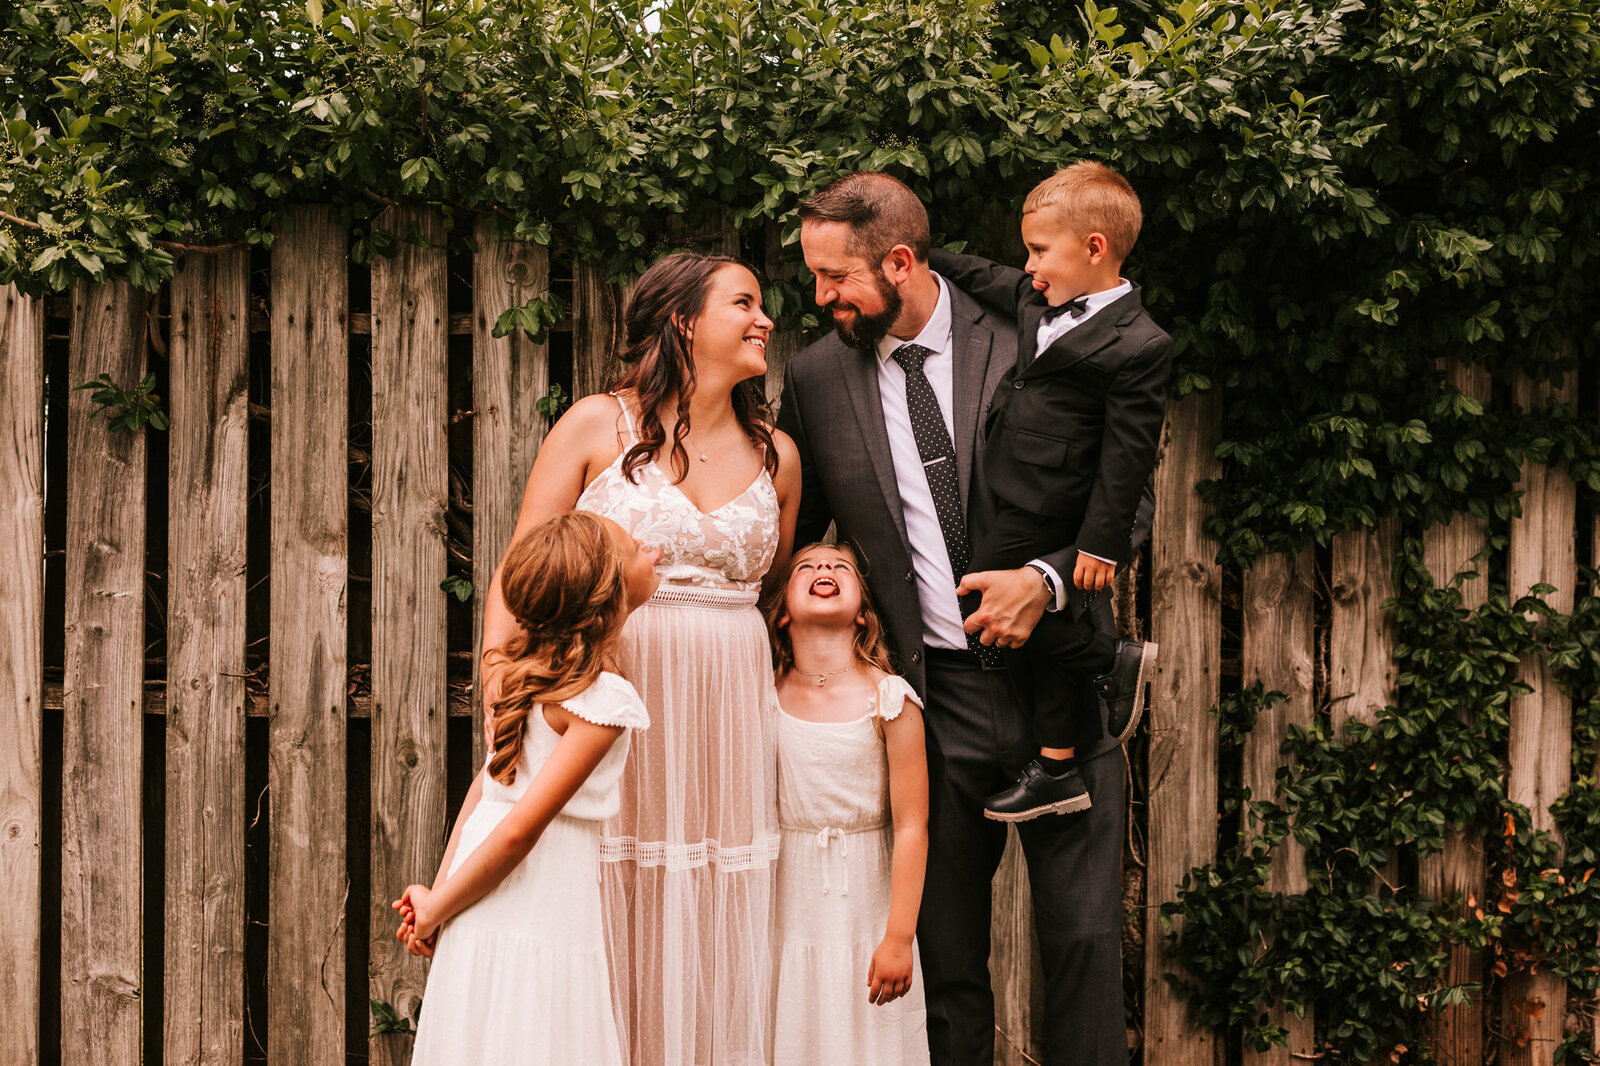 blended family at small wedding outside standing and looking at each other while laughing